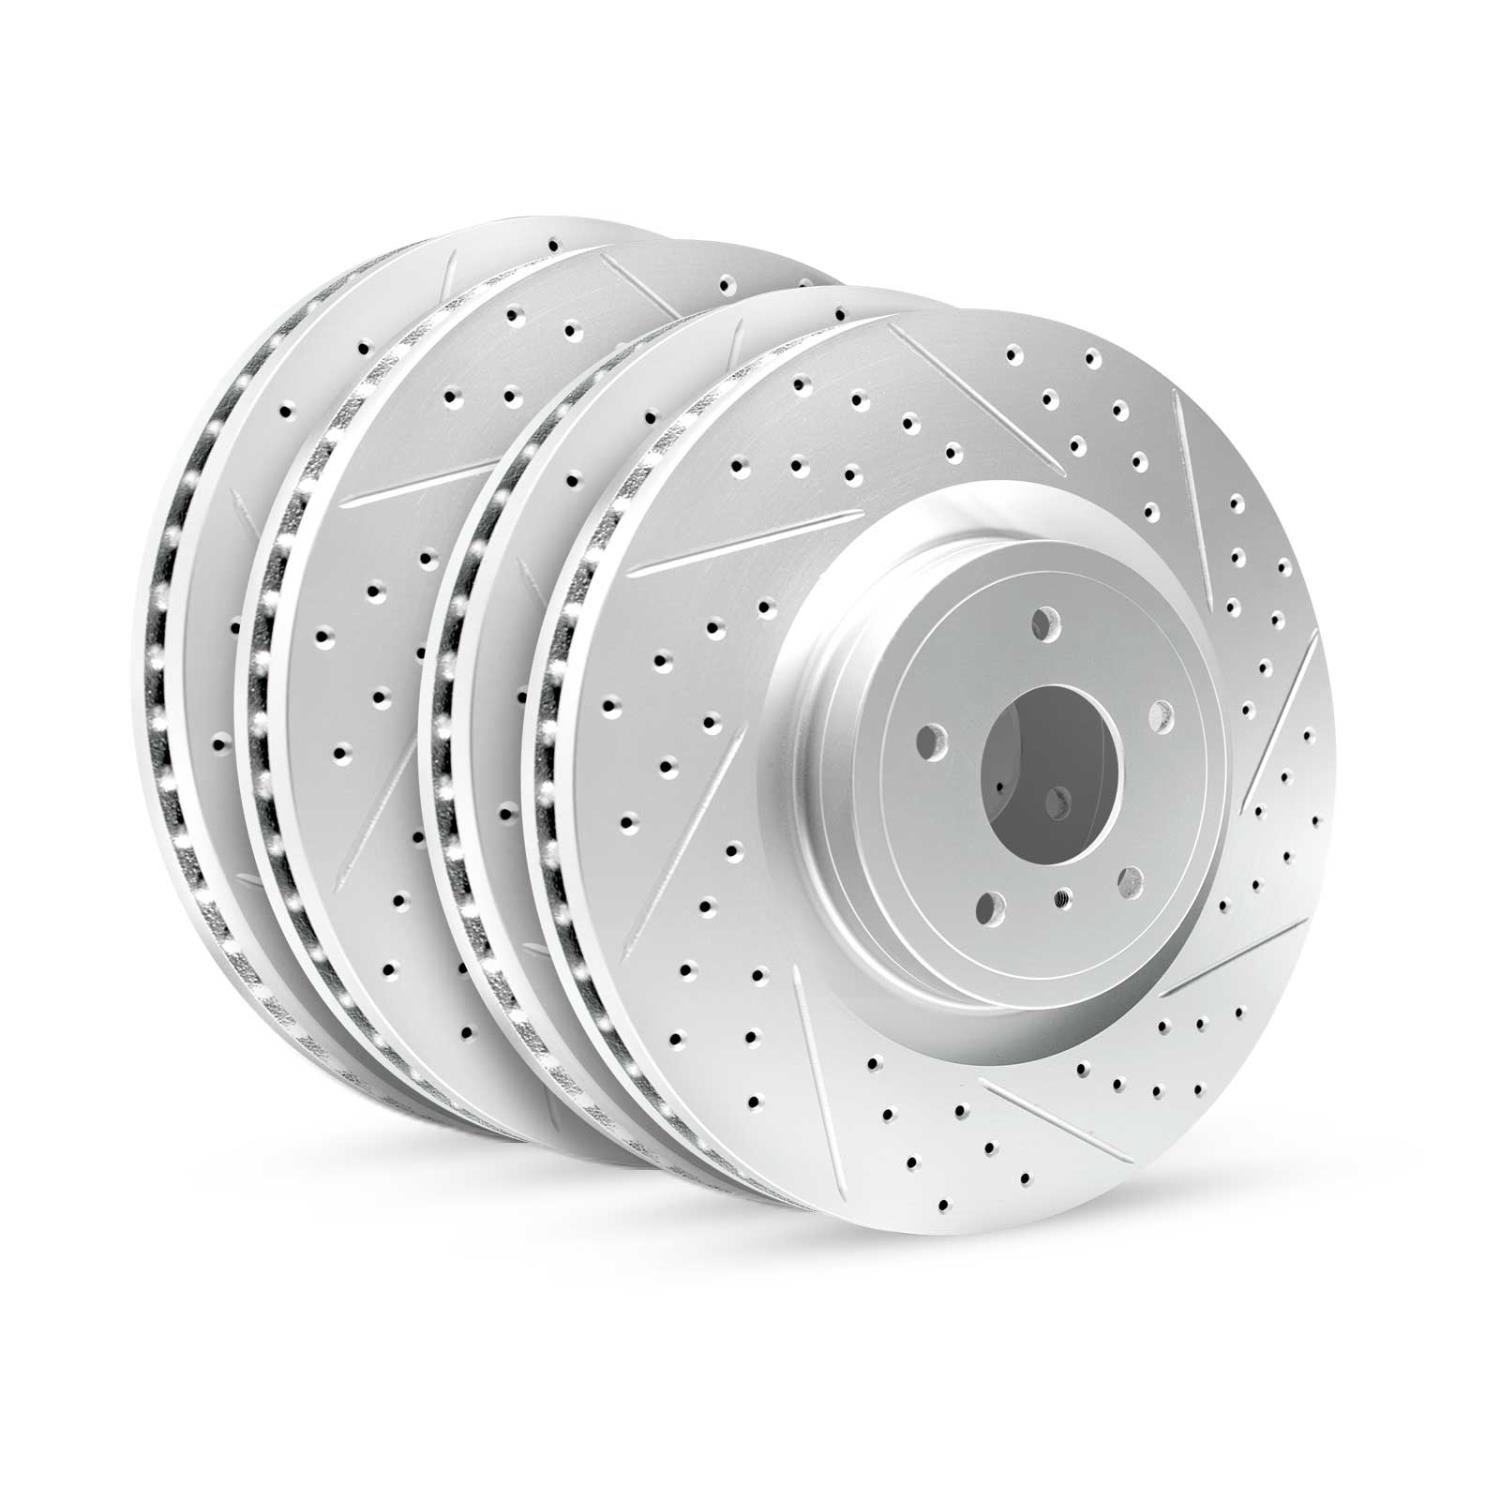 GEO-Carbon Drilled/Slotted Rotors, 2011-2012 Kia/Hyundai/Genesis, Position: Front/Rear